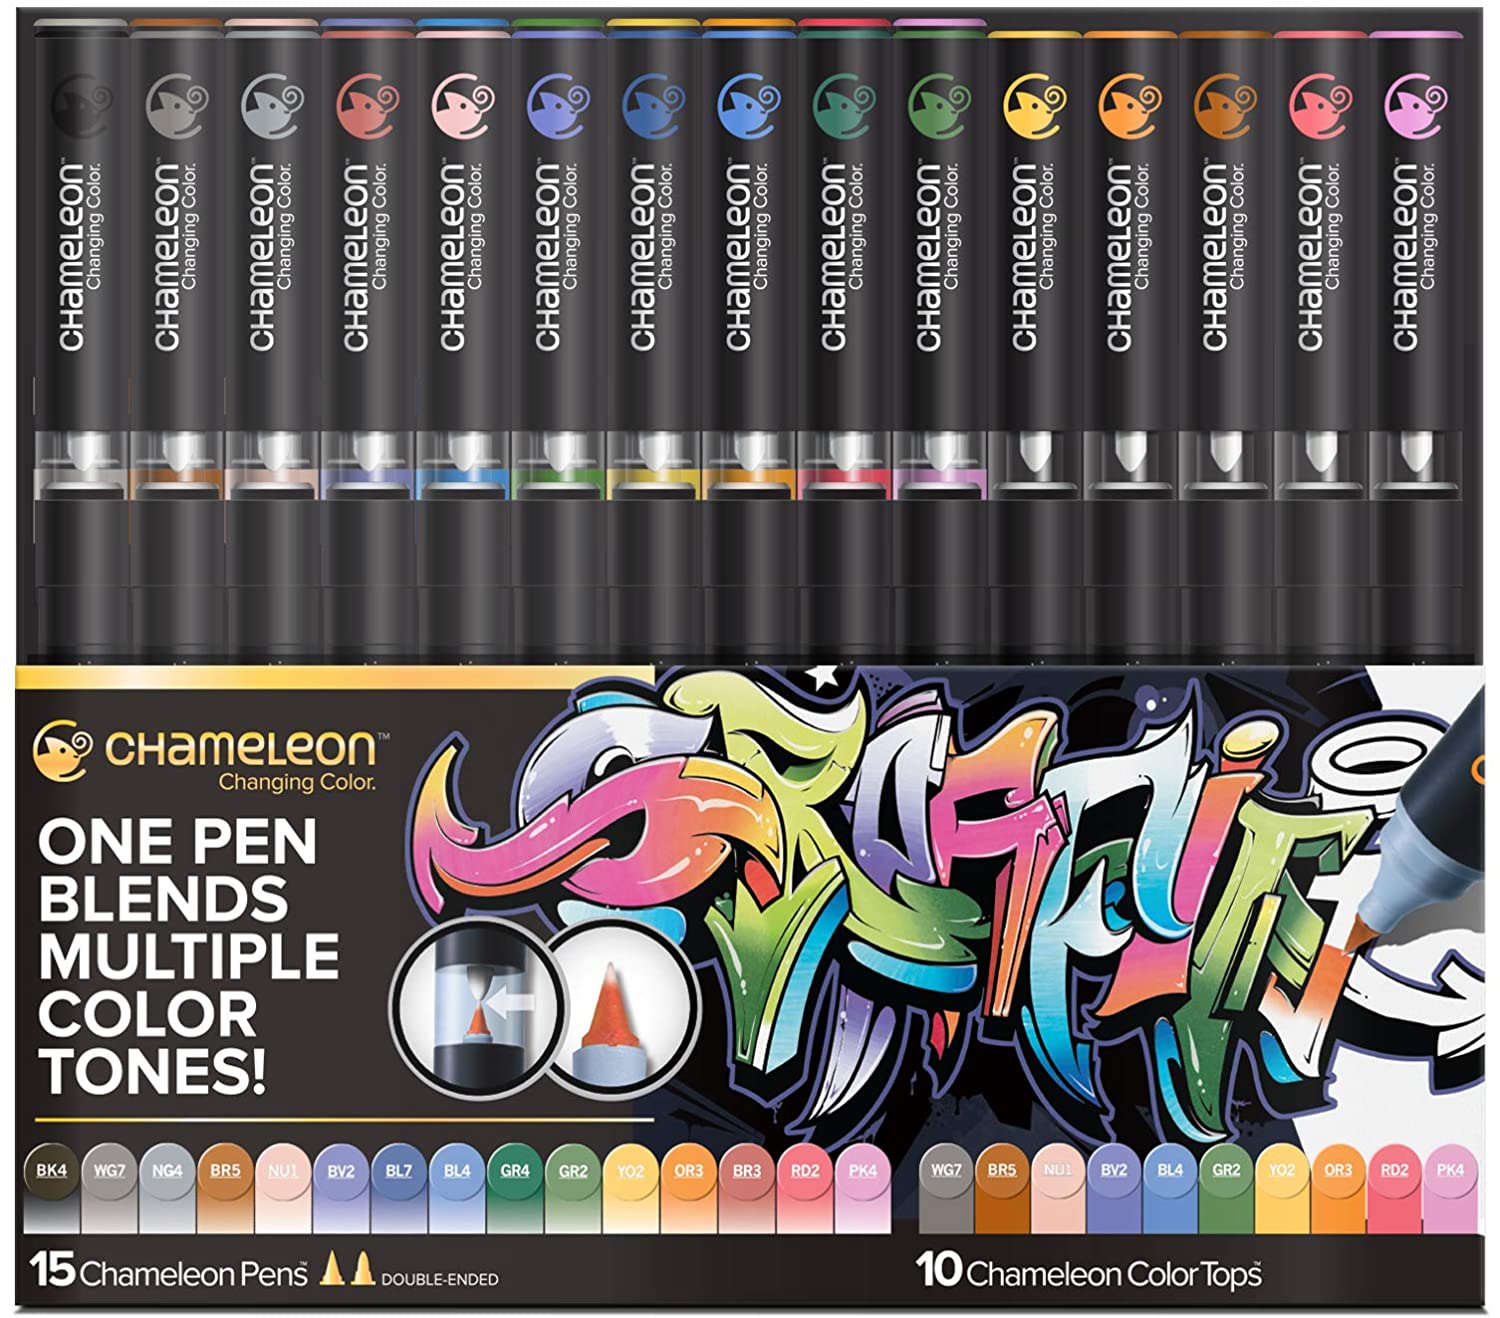 6 Awesome Ways to use Chameleon Pens 